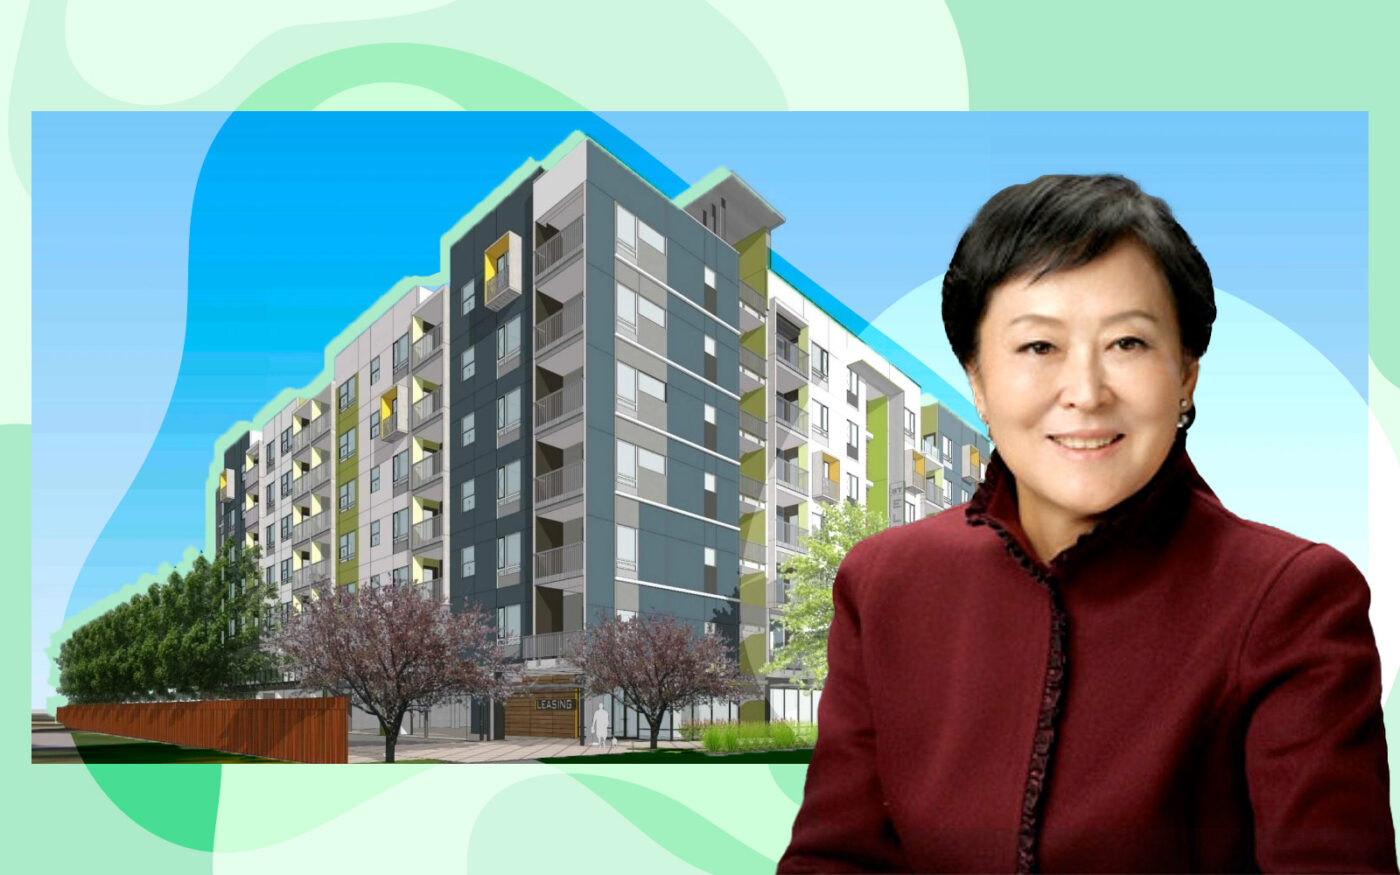 KCR Development's Annie M.H. Chan with a rendering of 1050 St. Elizabeth Drive in San Jose